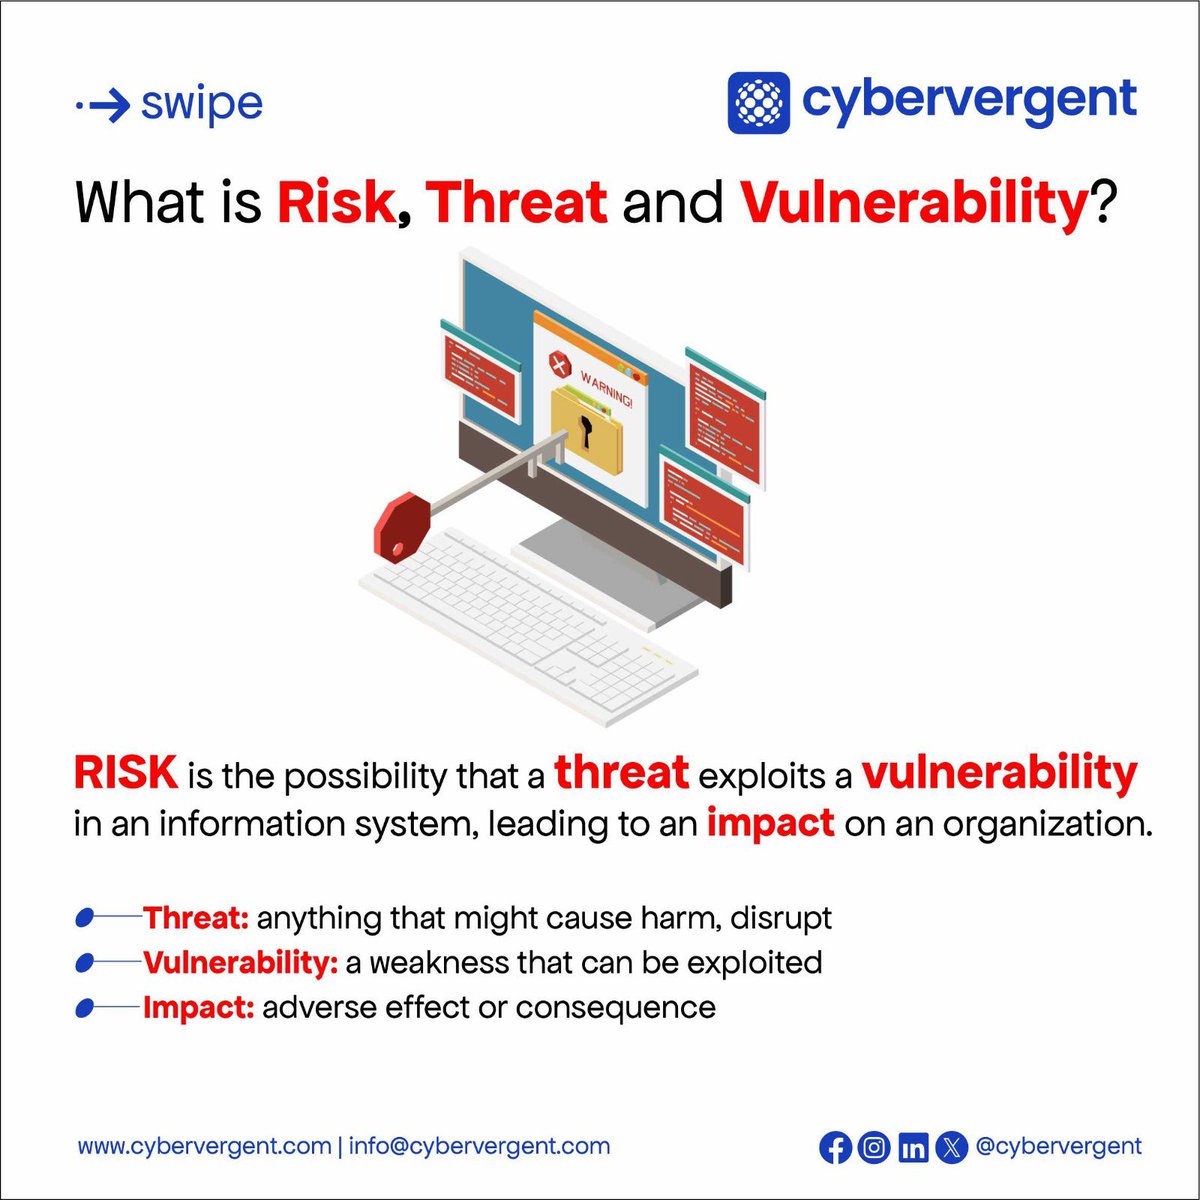 Having an Understanding between risk, threat and vulnerability, is crucial in fostering trust. A company's computer systems might be vulnerable to a cyber-attack because they are not regularly patched with security updates.